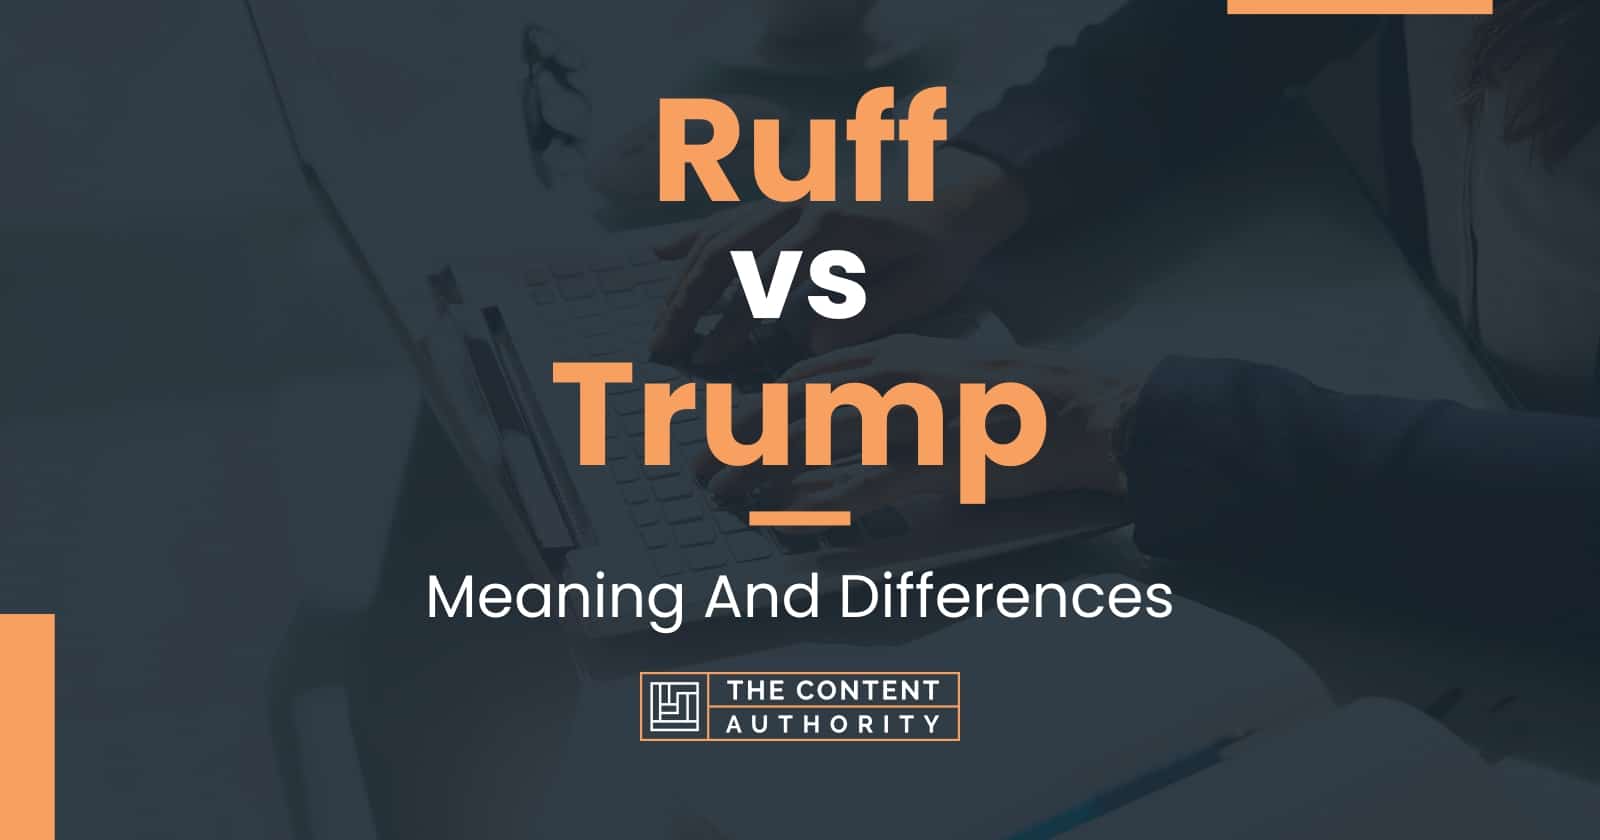 Ruff vs Trump Meaning And Differences